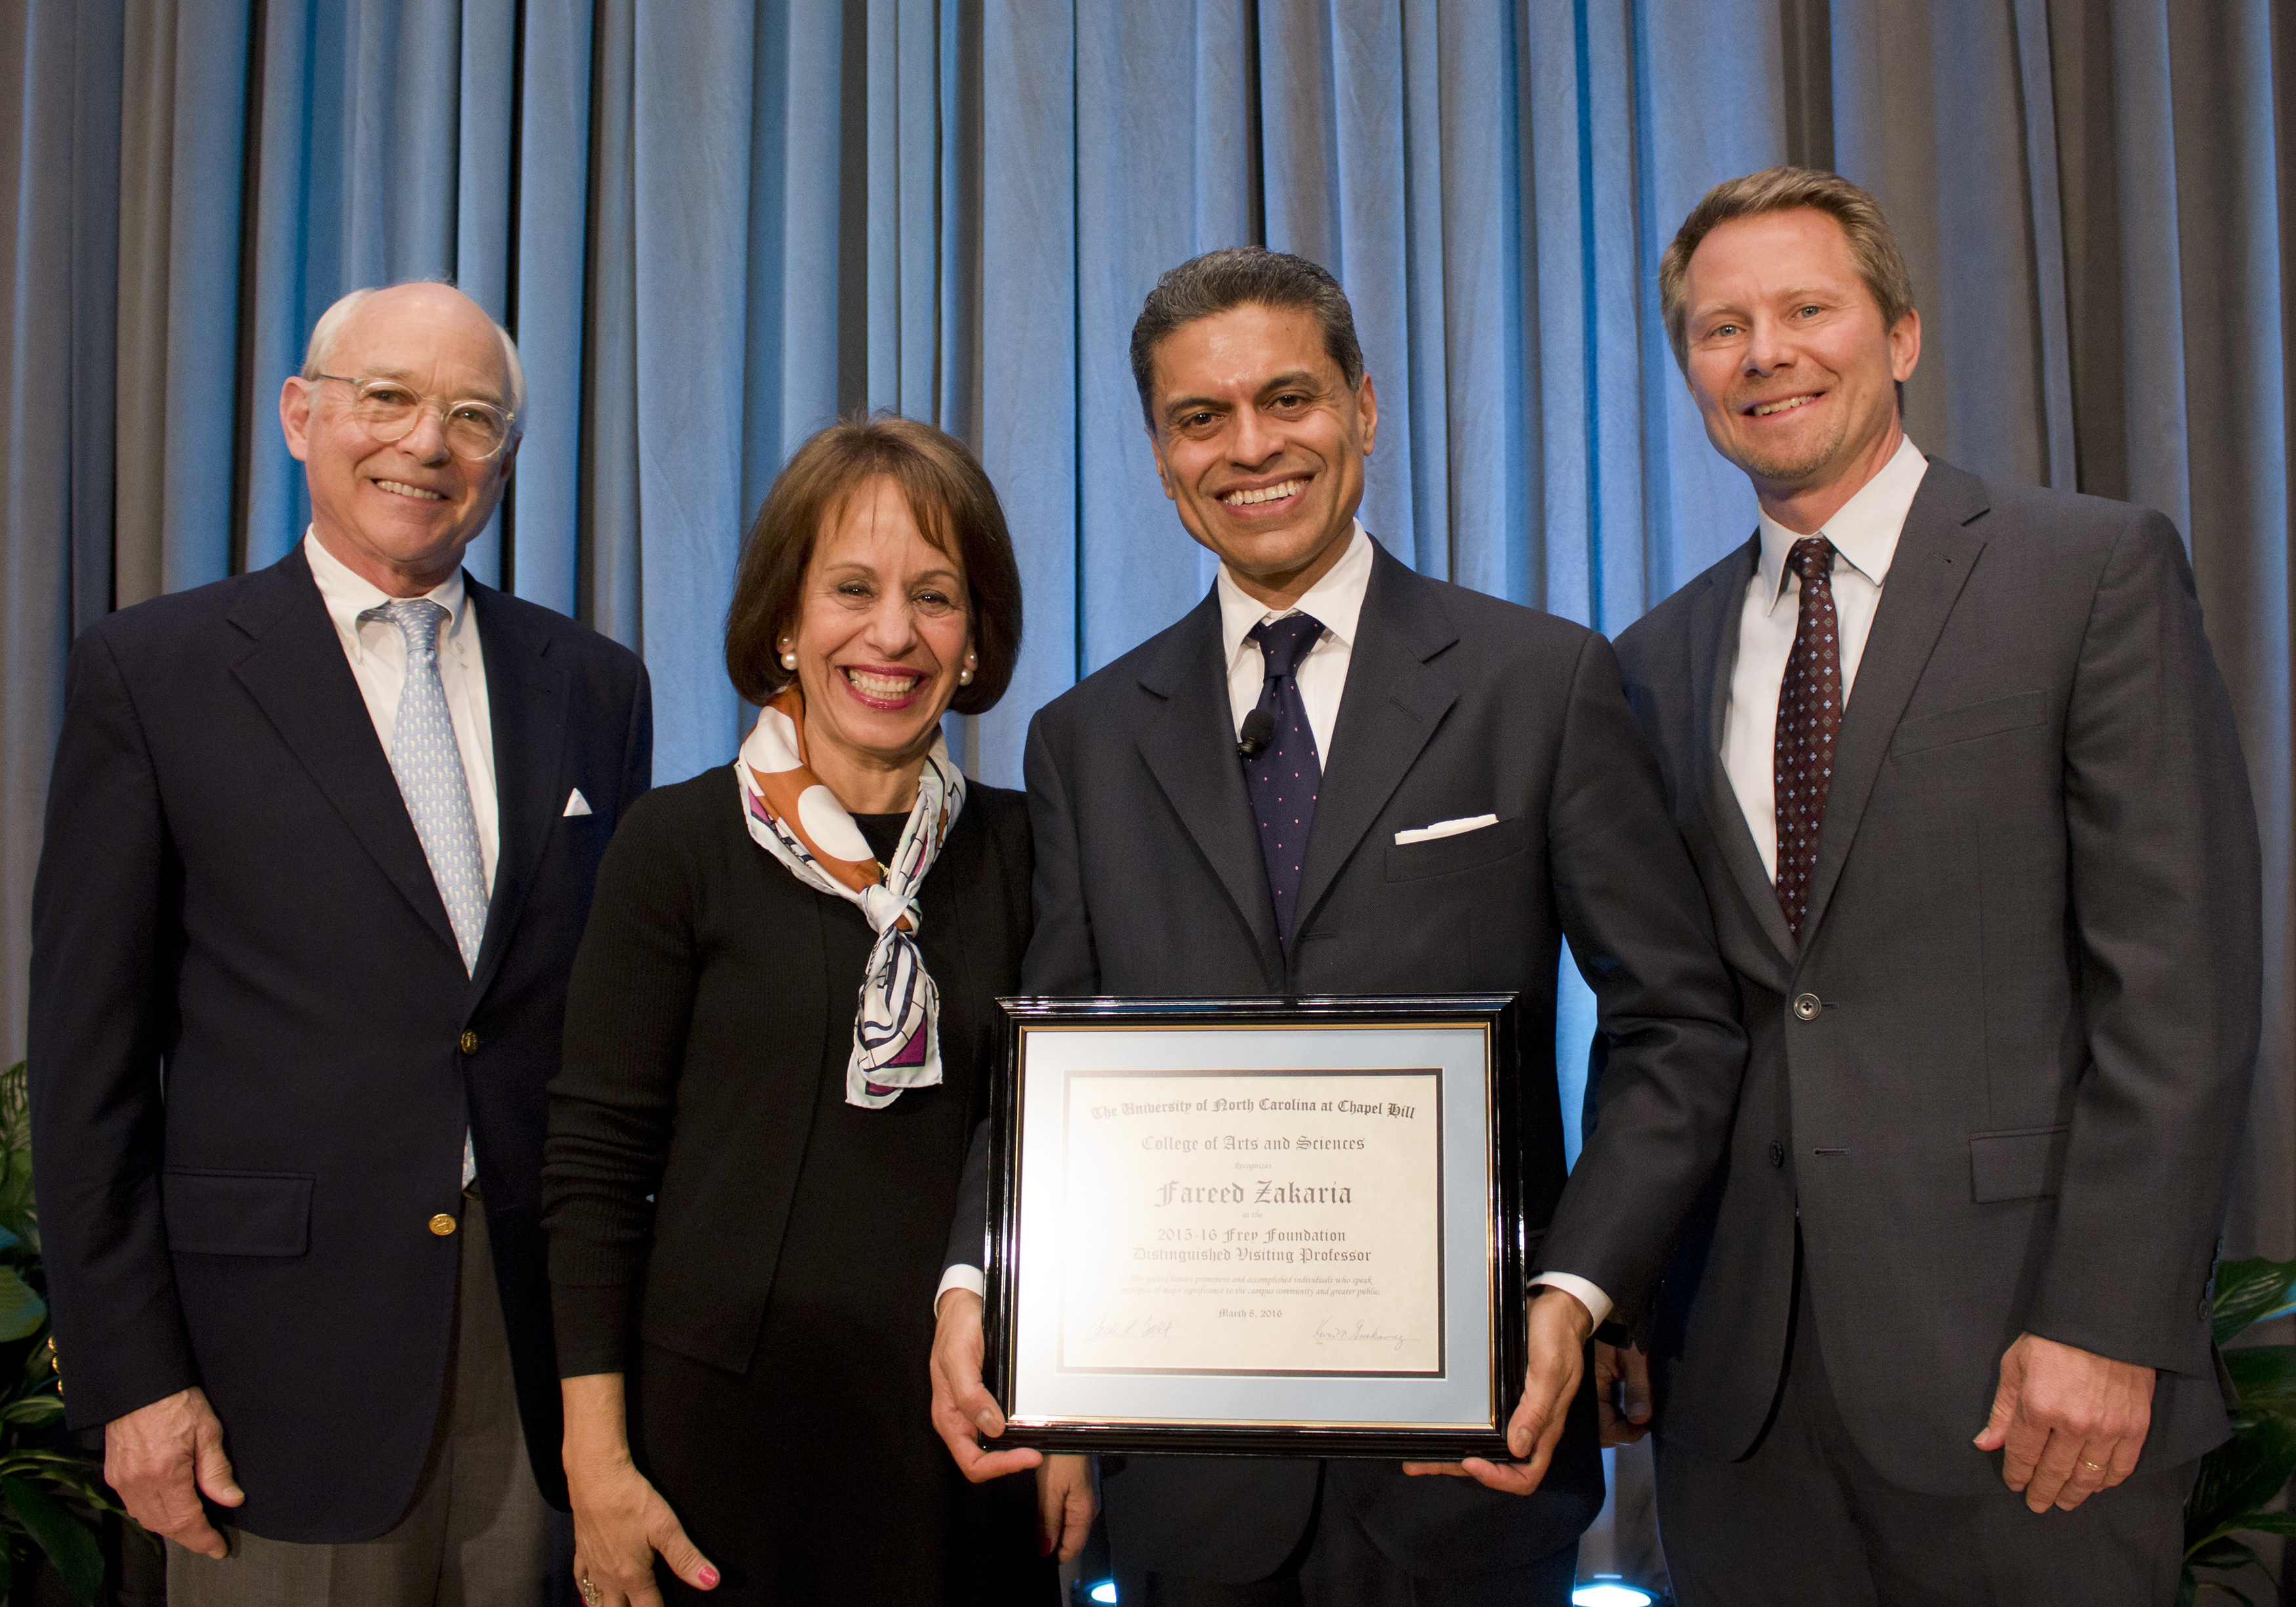 From left, David Frey (who made the Frey Lecture possible), Chancellor Carol L. Folt, Fareed Zakaria and College Dean Kevin Guskiewicz. (photo by Kristen Chavez)